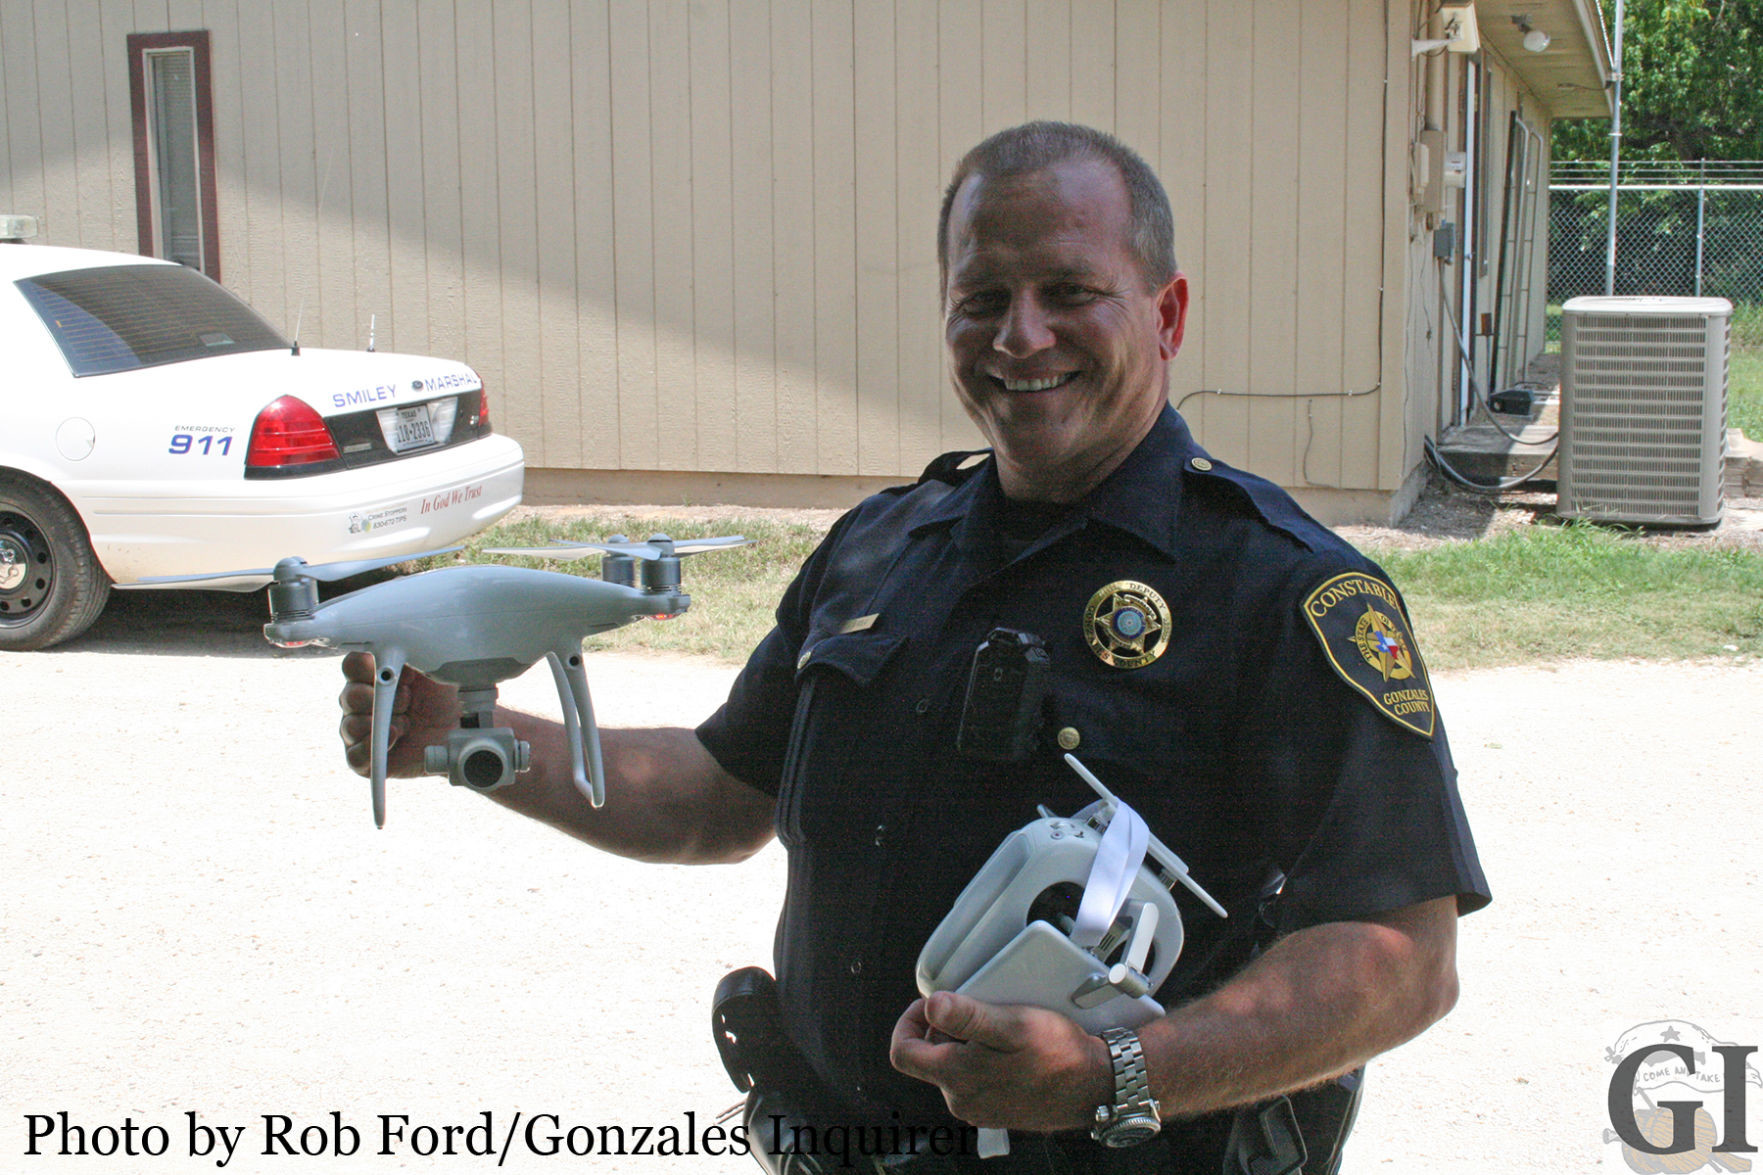 “We’ve been able to [train] without crashing it!” Deputy Constable Jerry Airola exclaimed, as deputy officials have been training to use the drone.